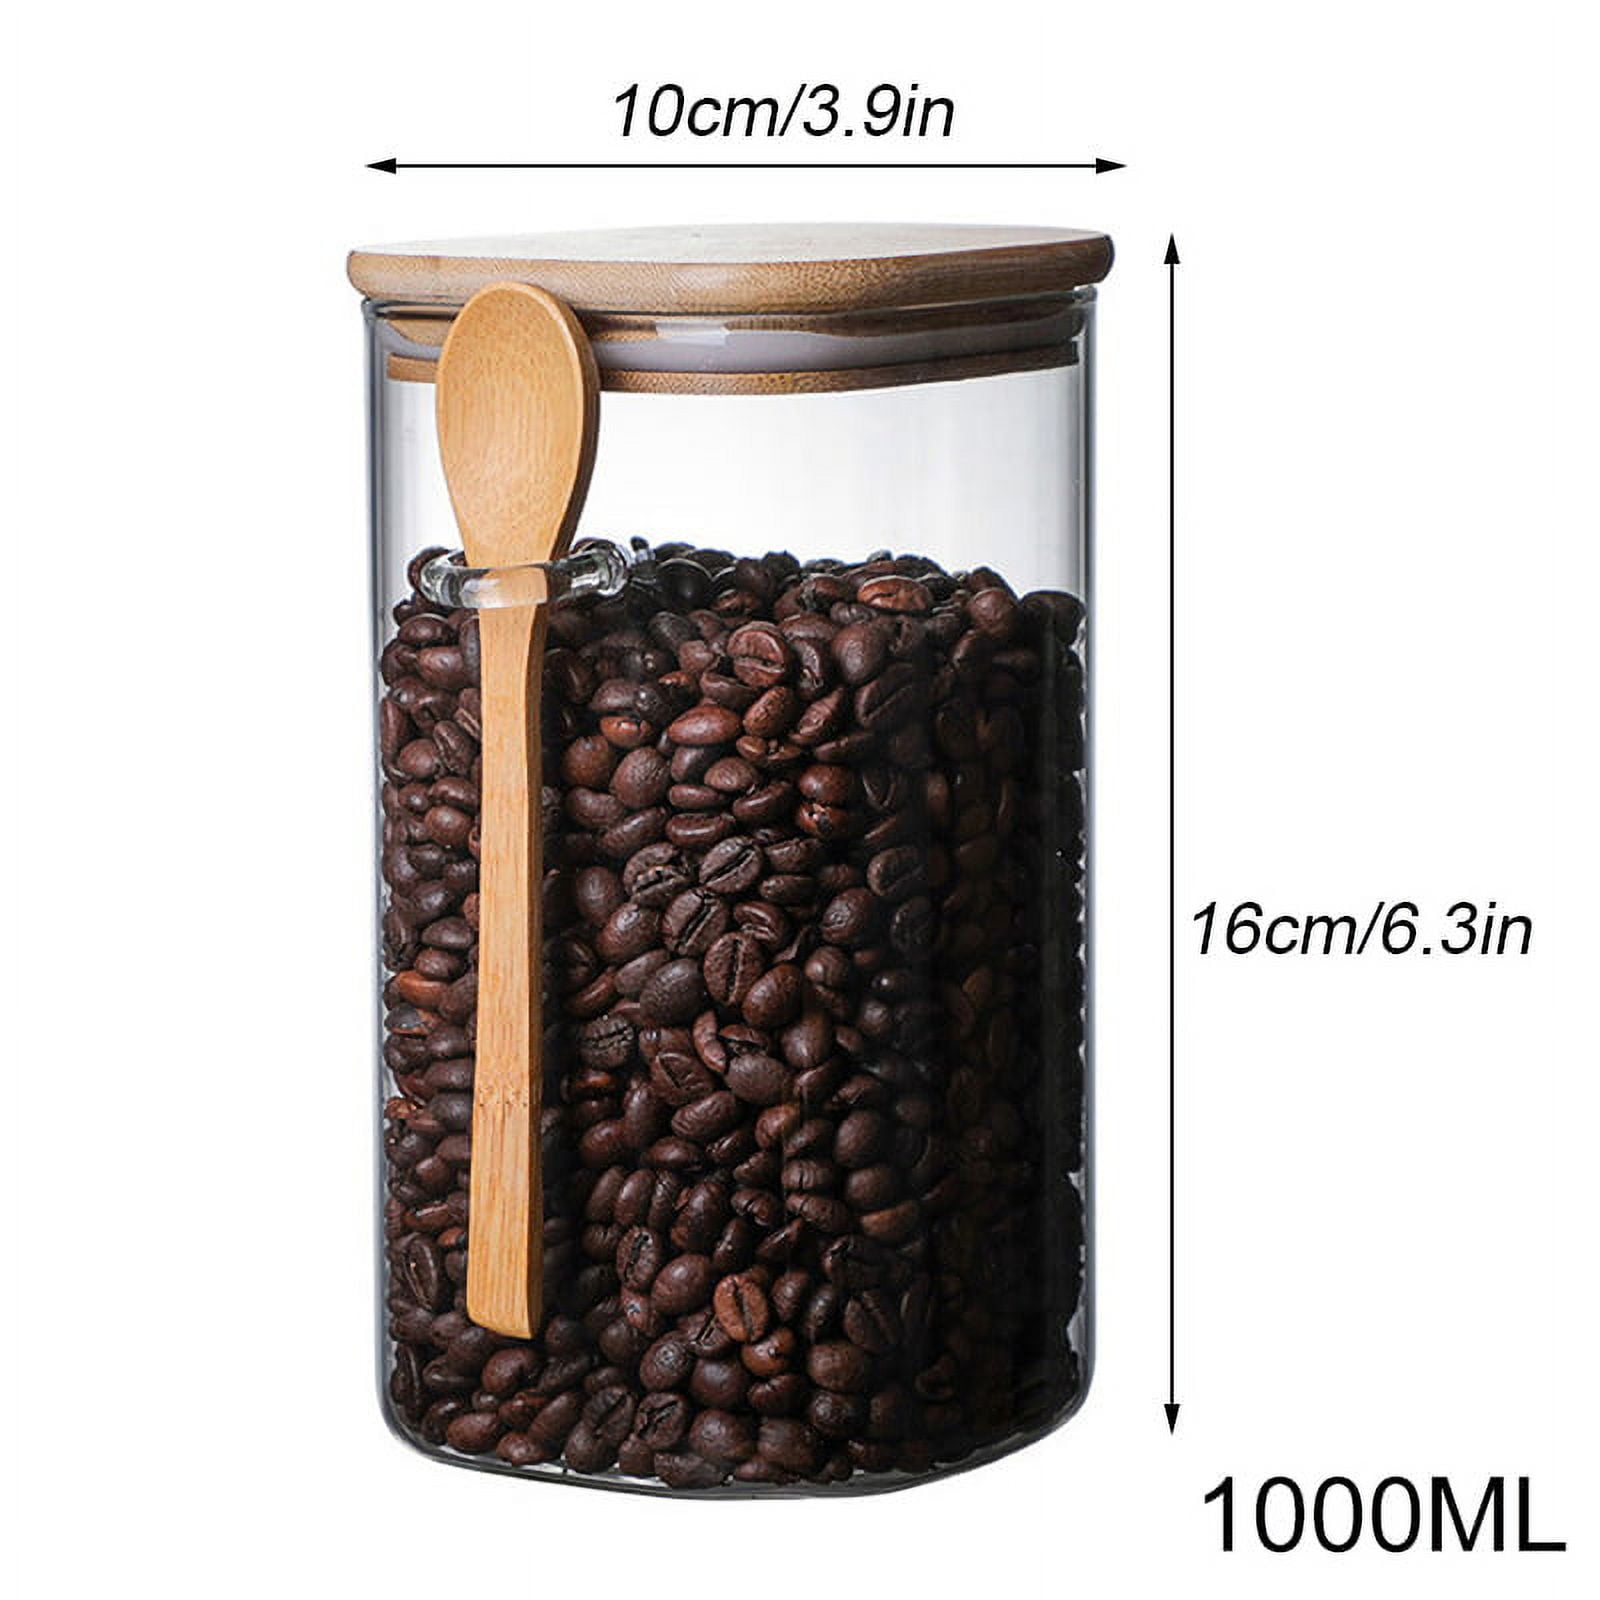 Sealed Glass Spice Jars Beans Coffee White 475ml 2pcs/3pcs Large Capacity  Practical With Lids And Spoons 